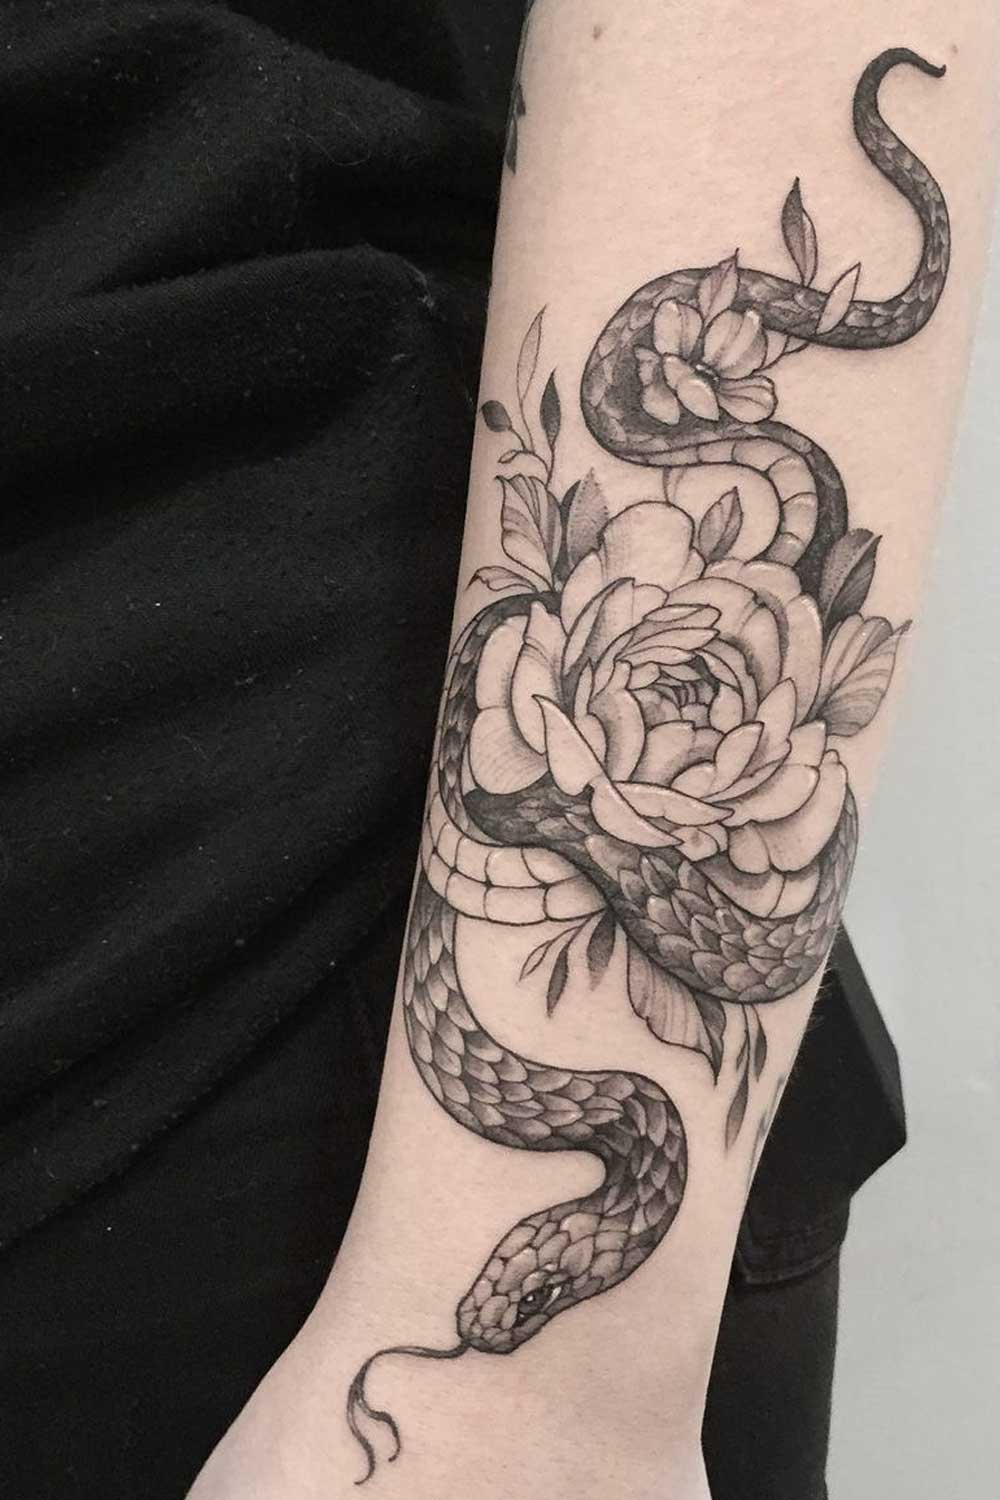 Hand Tattoo with Snake and Flowers